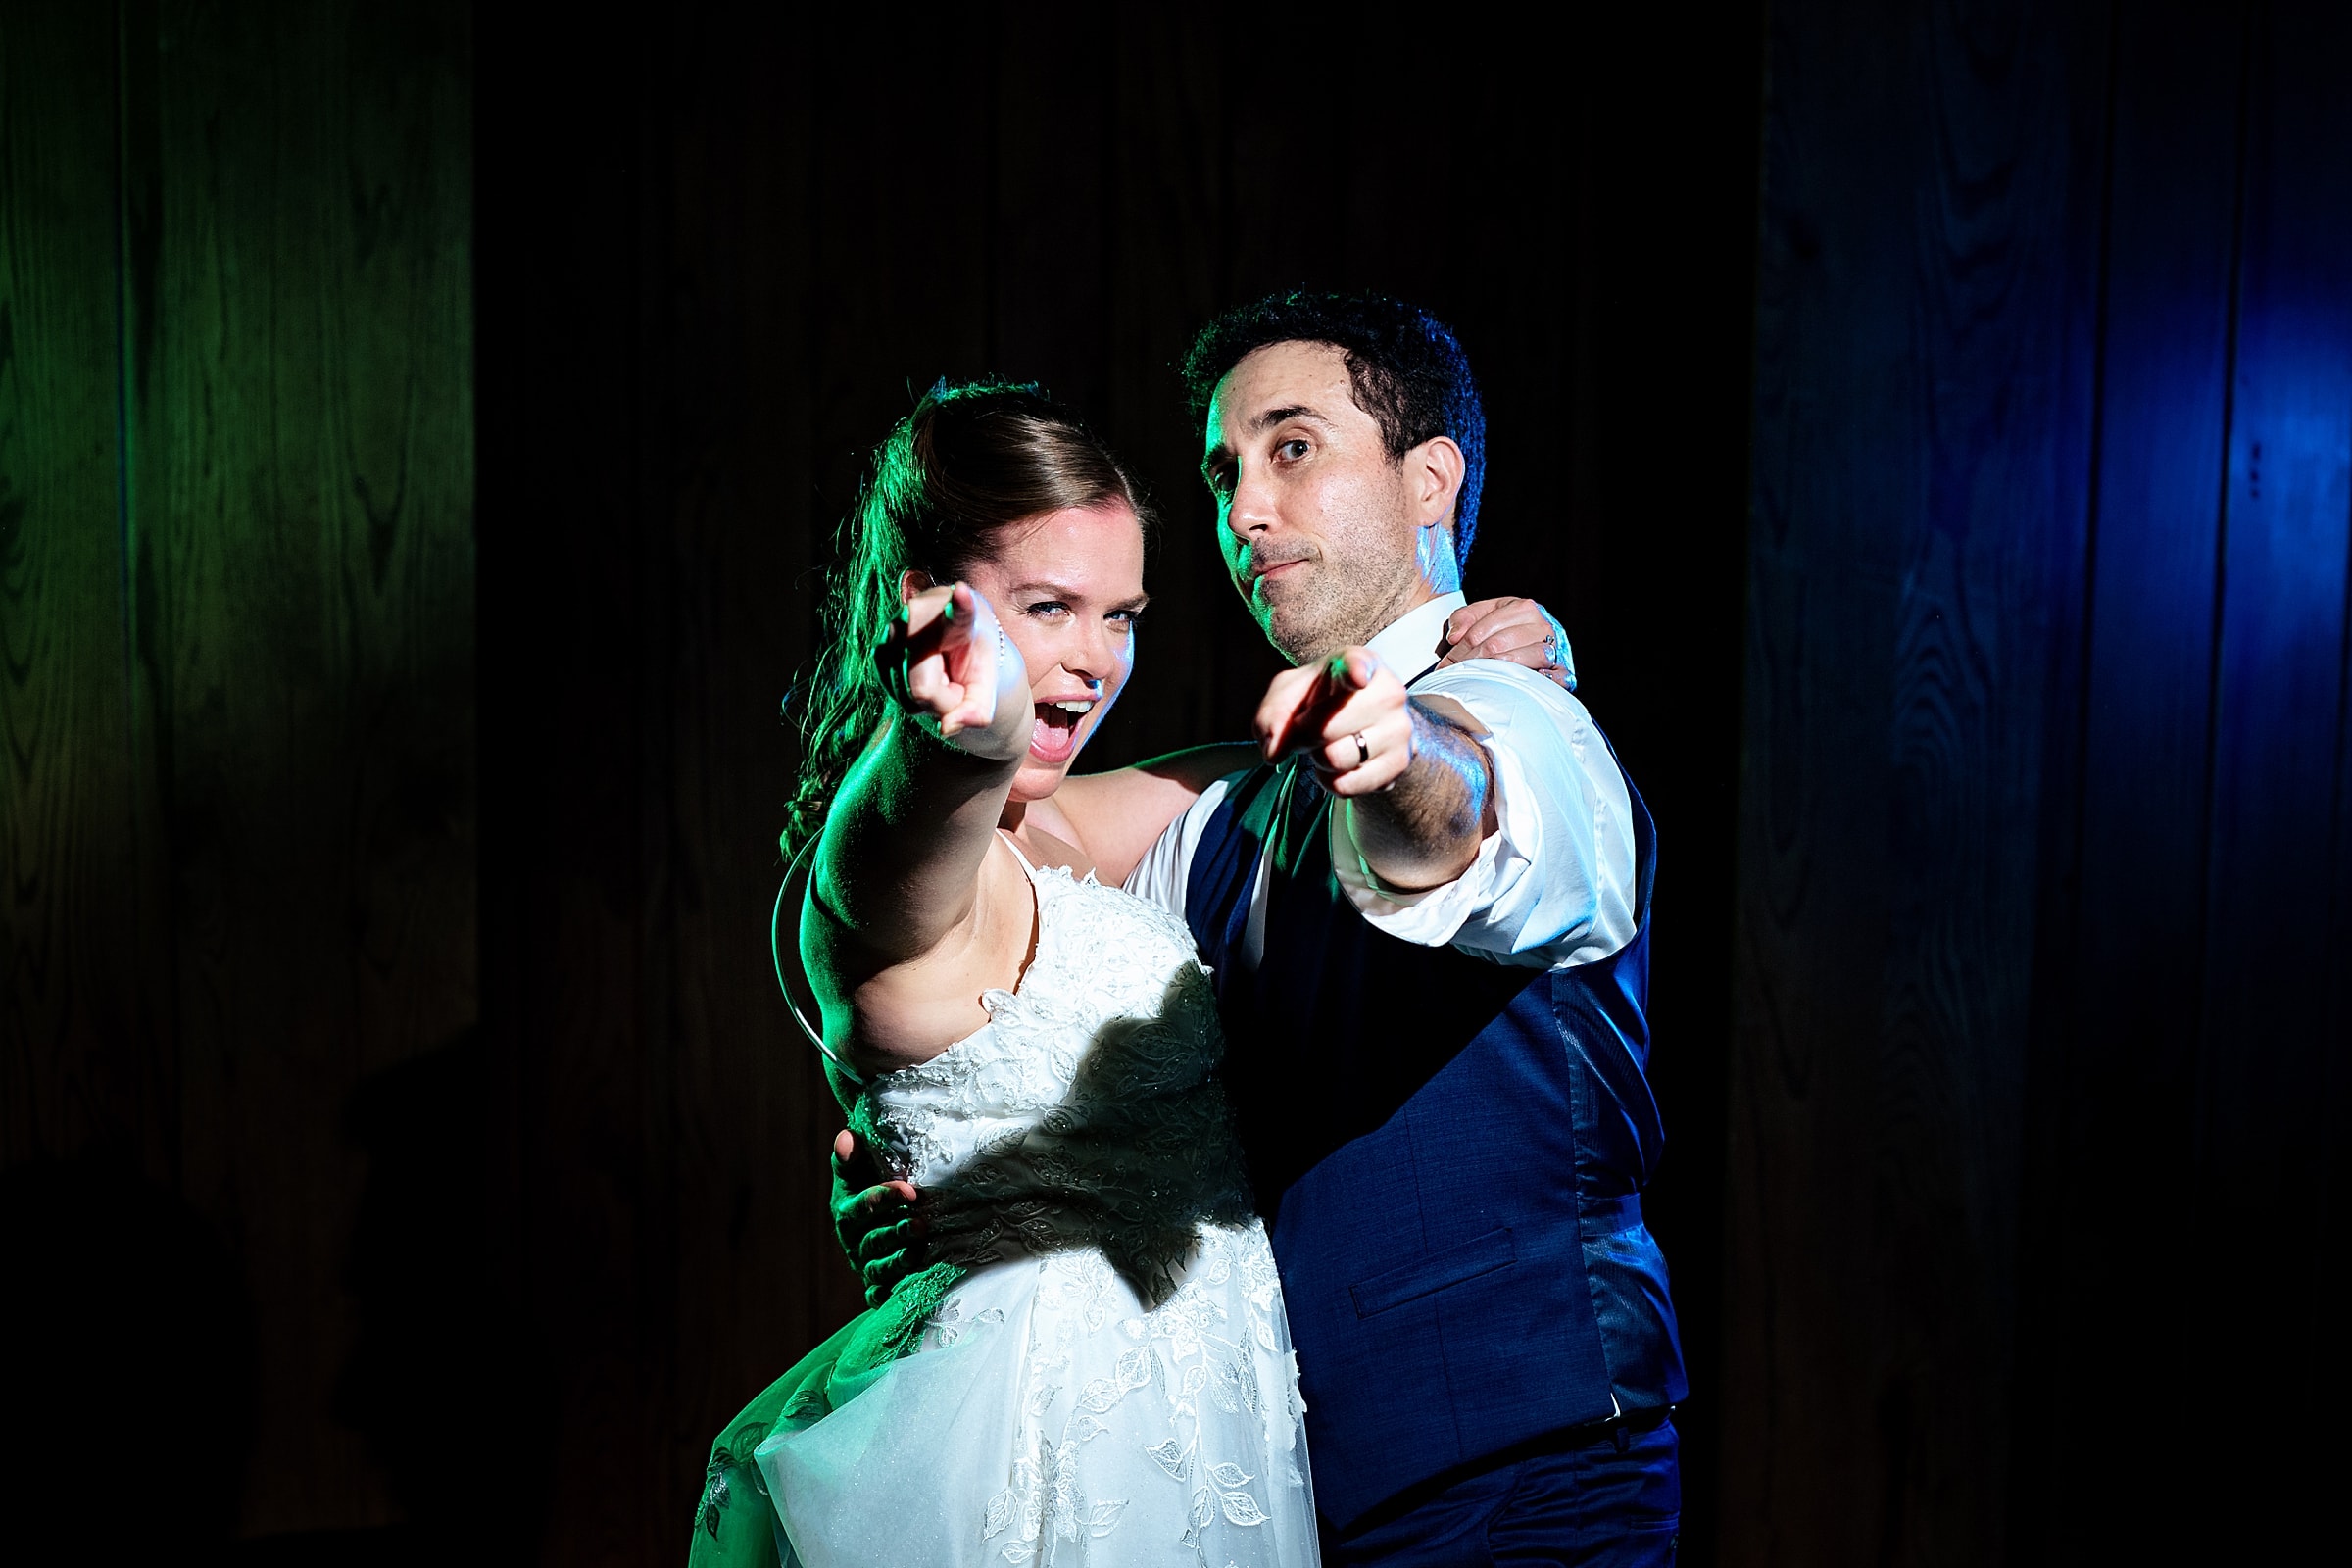 After dark creative and colorful wedding portraits